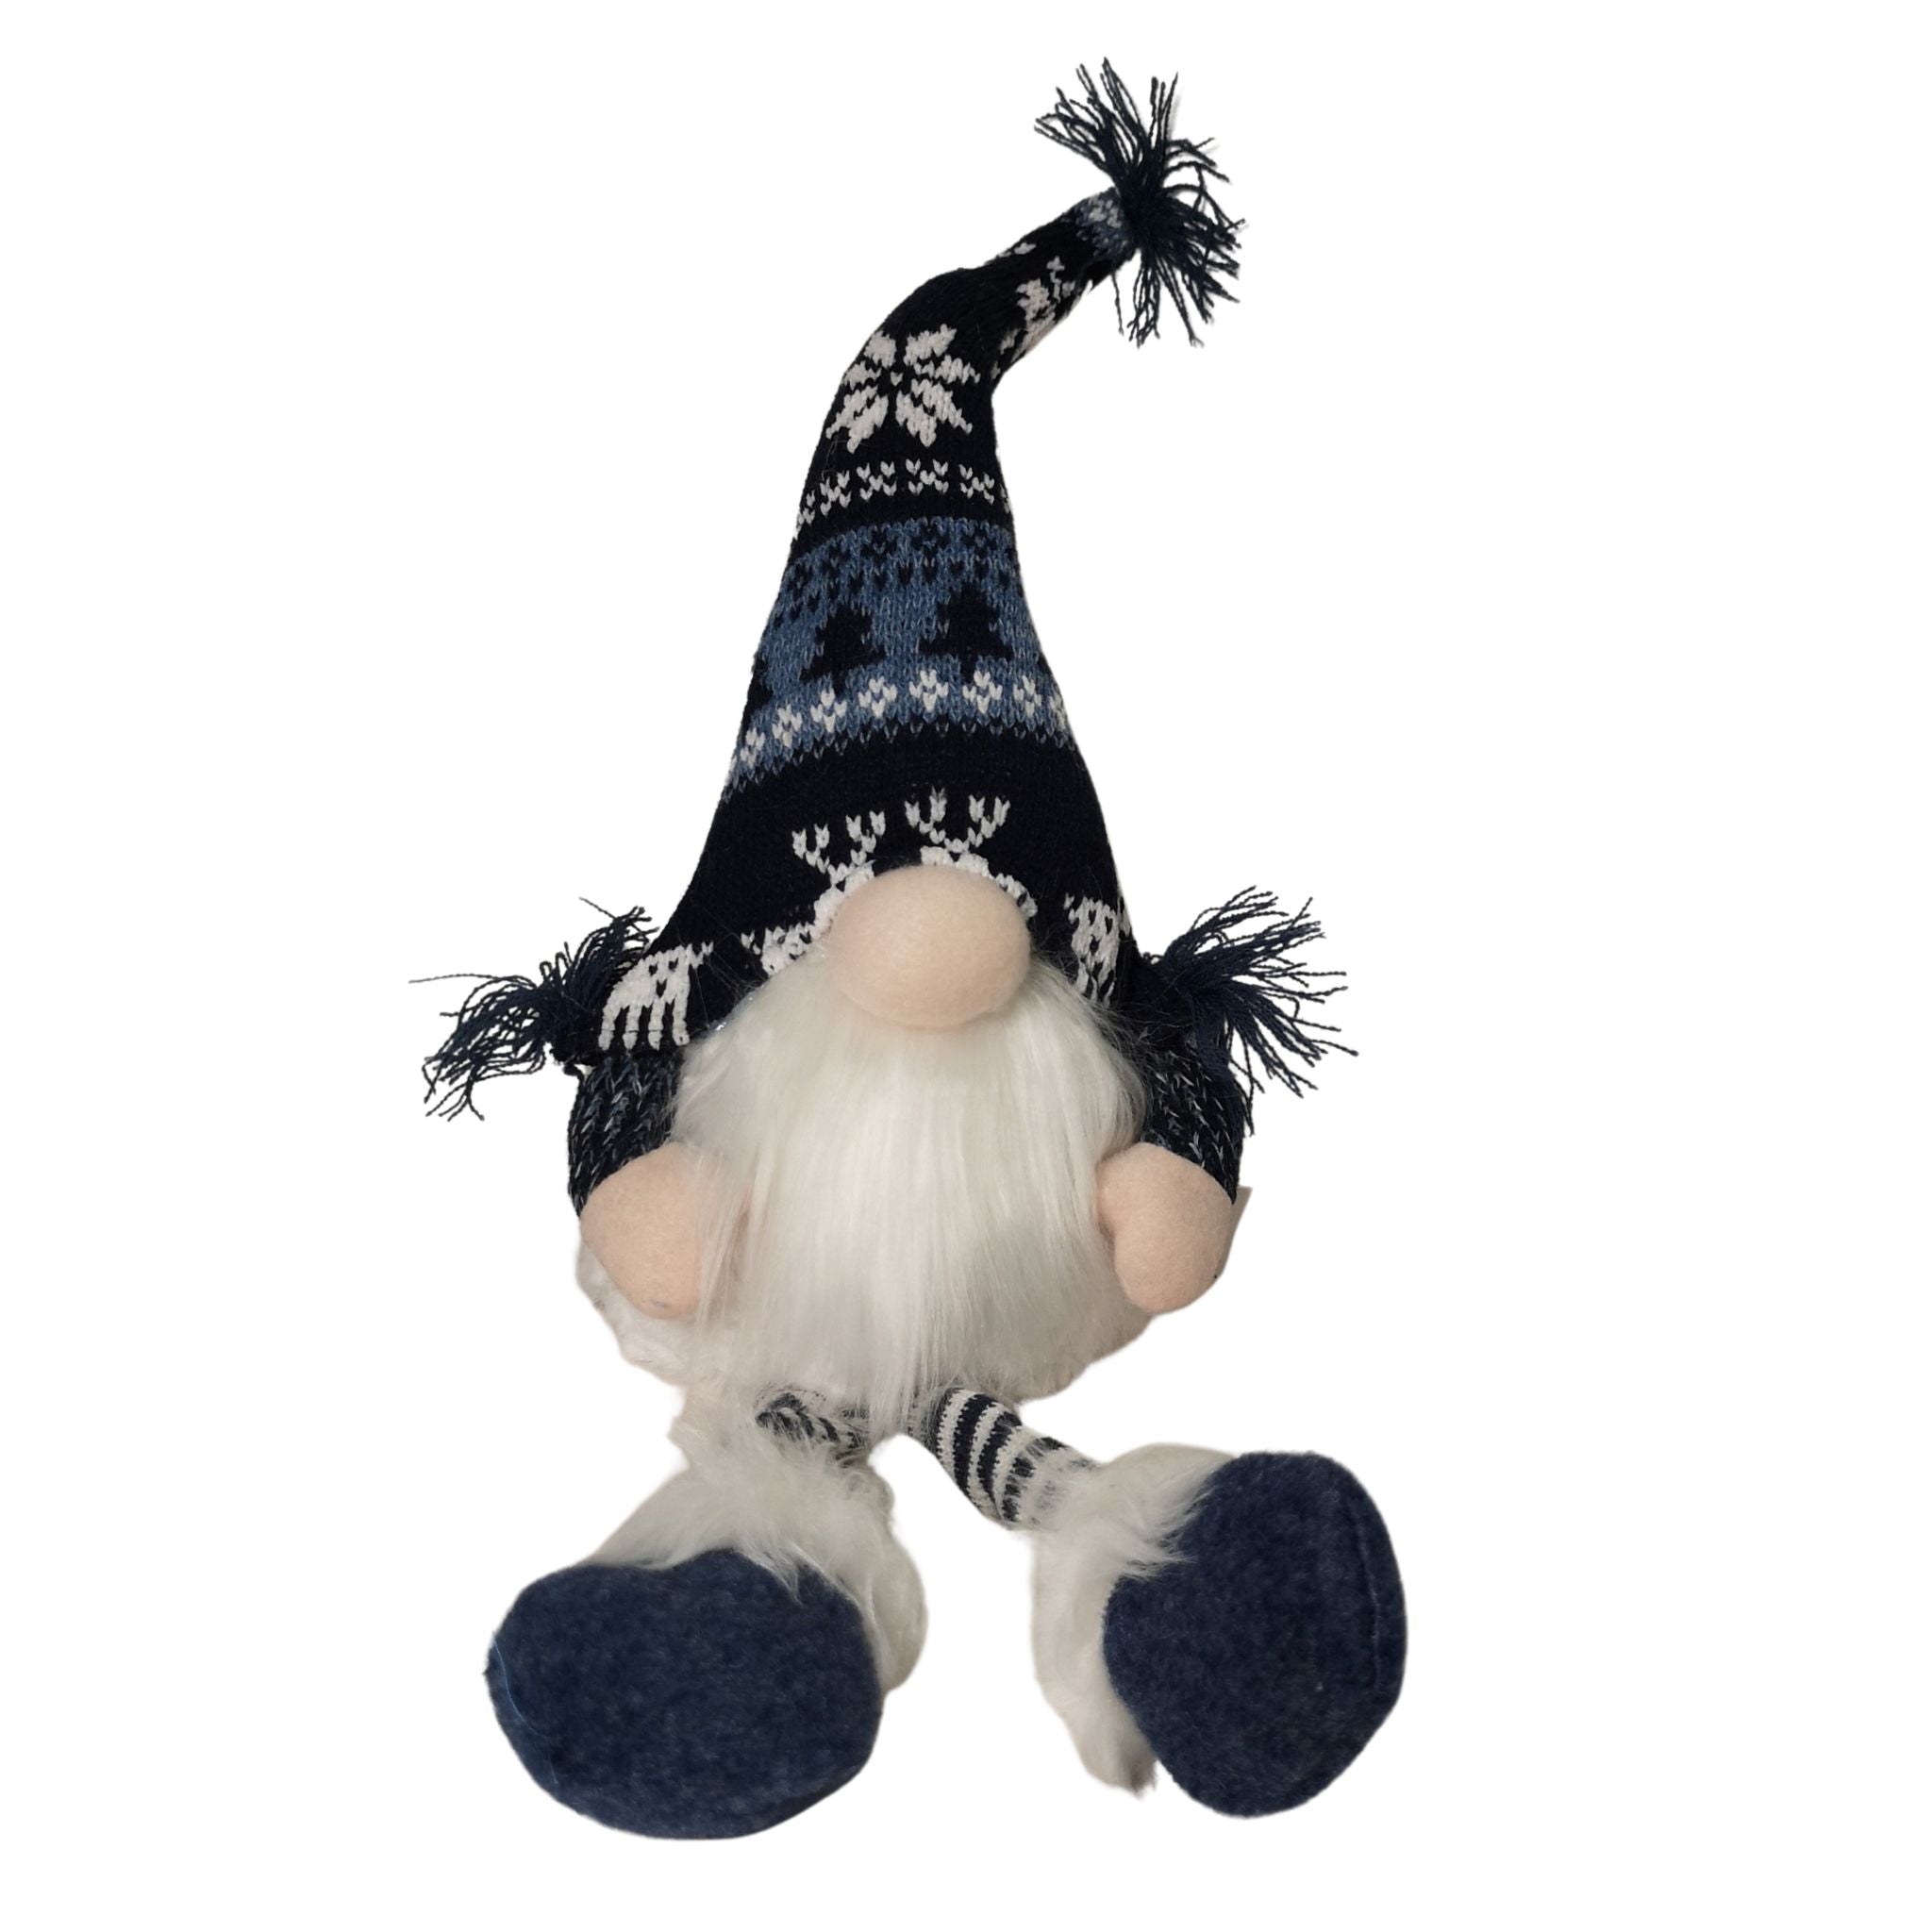 50cm Battery Operated Light Up Sitting Christmas Gonk with Dangly Legs in Dark Blue